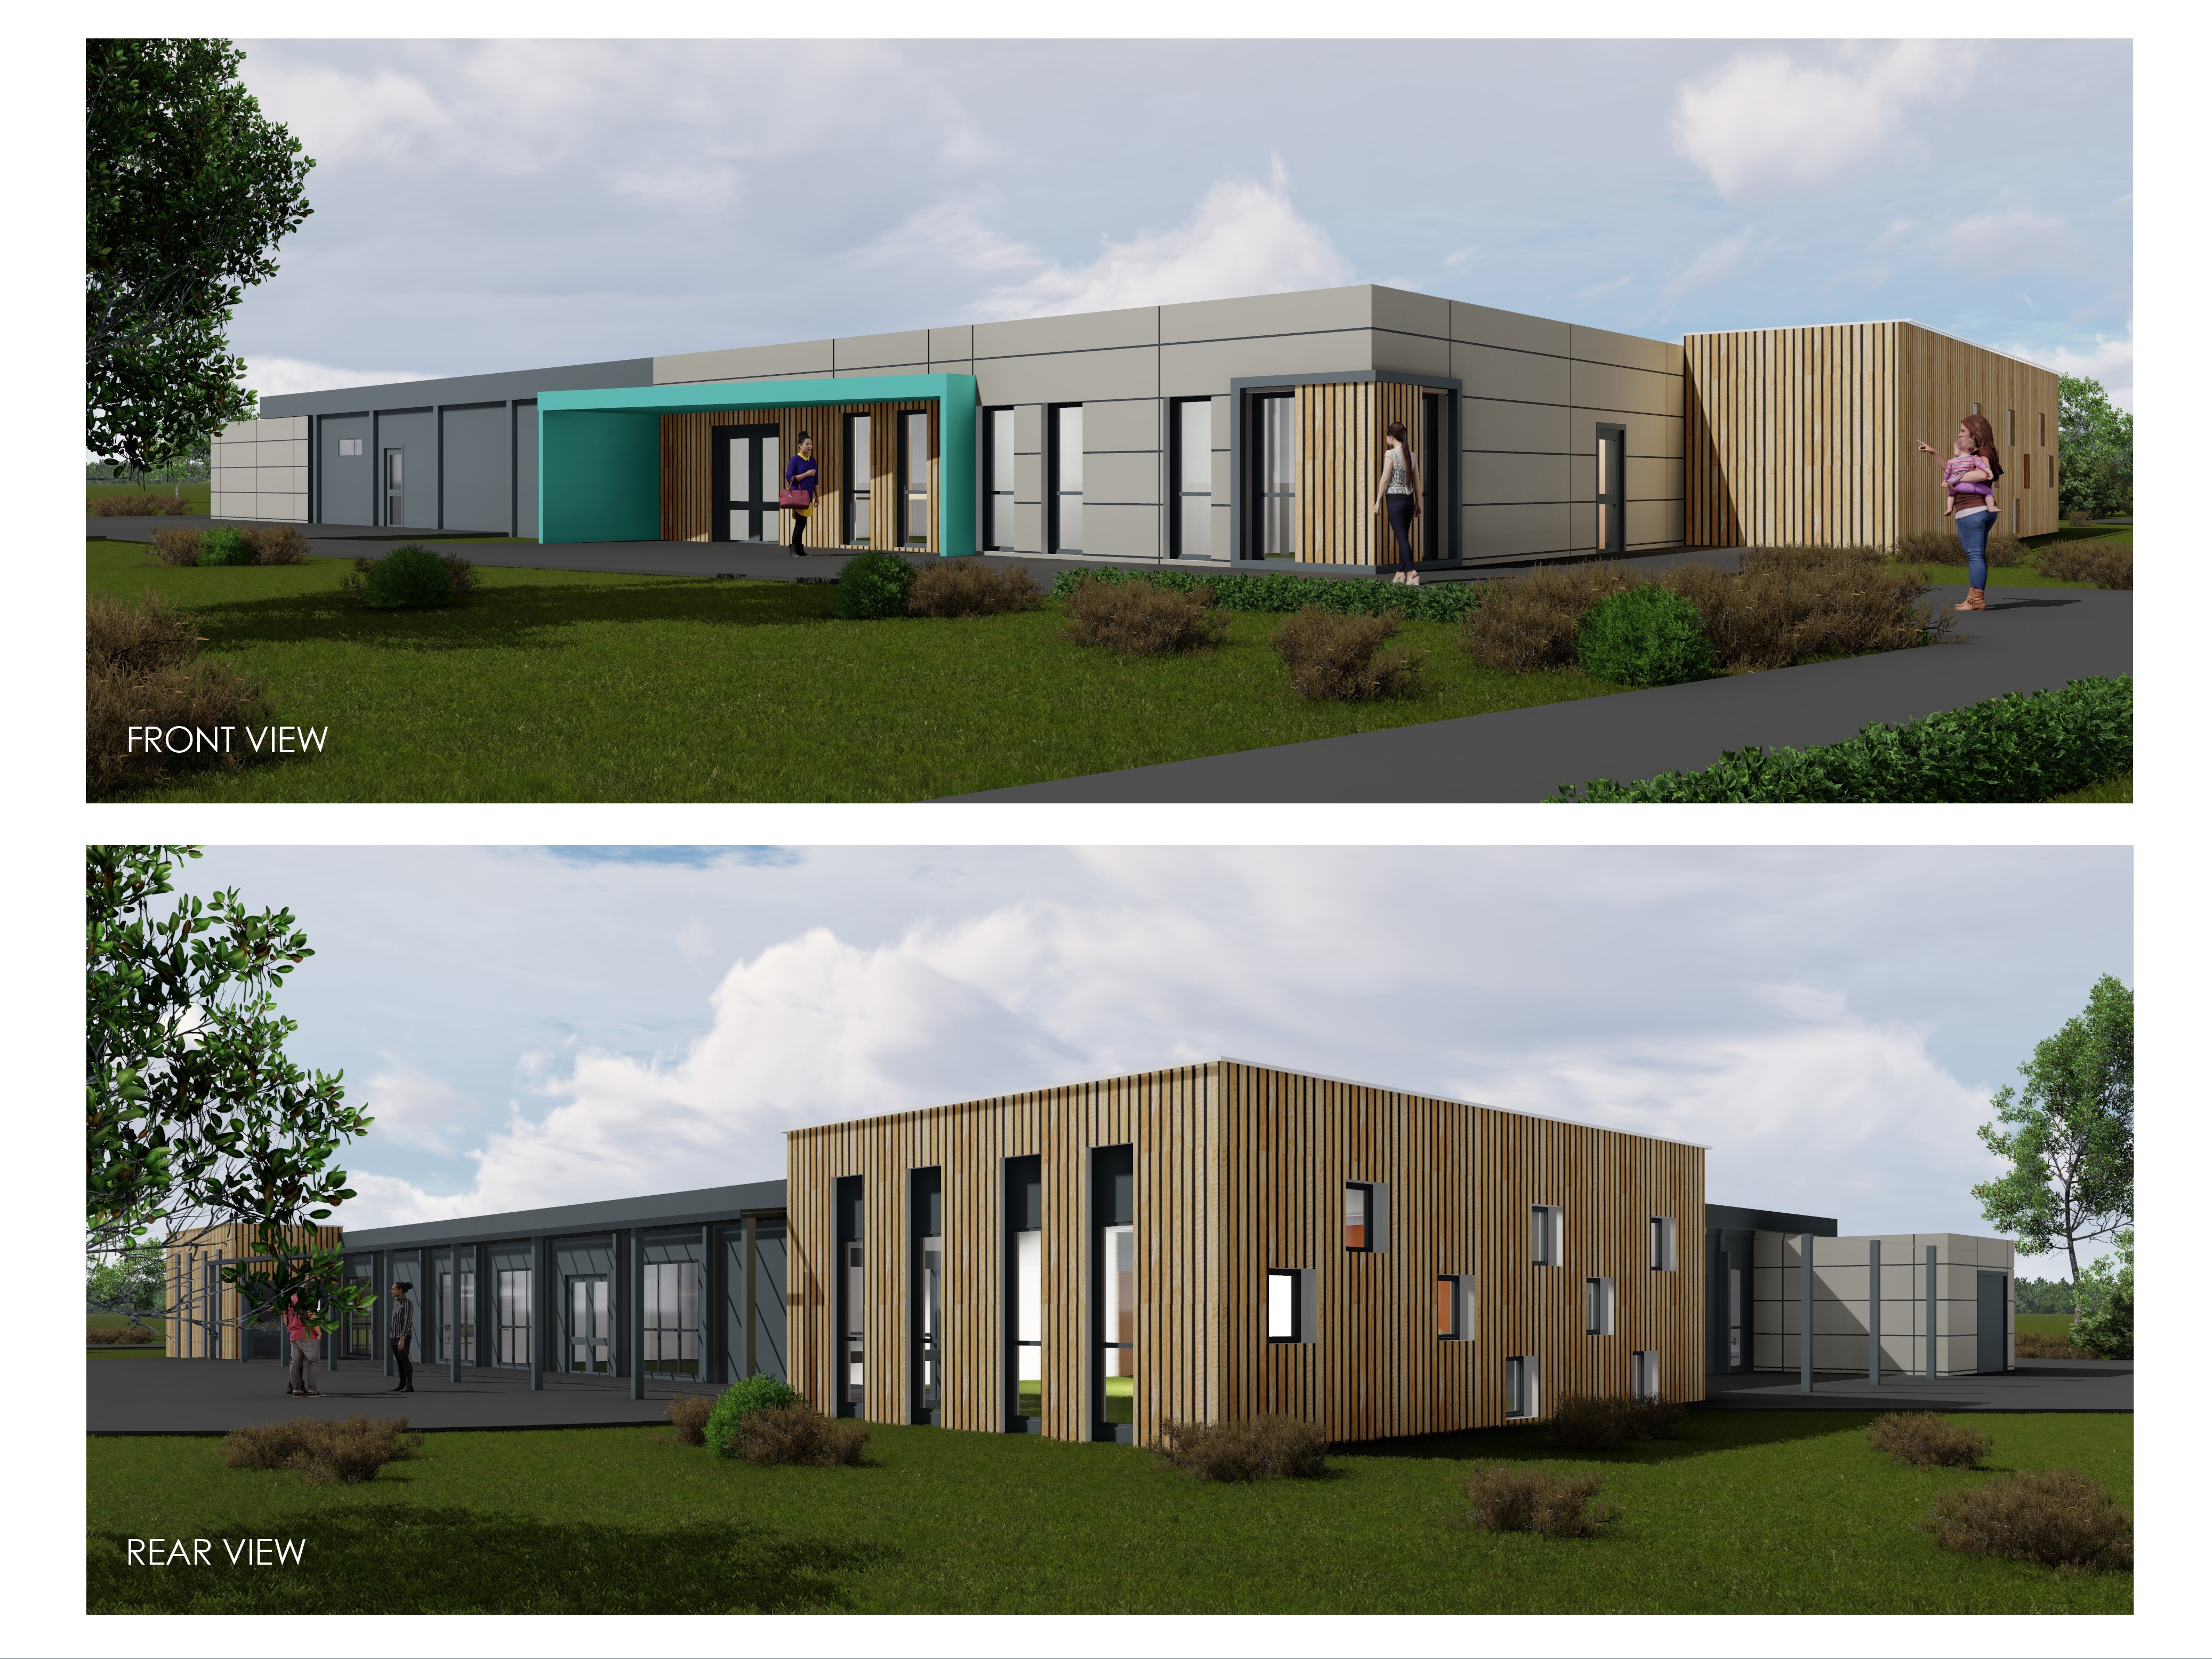 Portakabin to deliver proposed South Ayrshire early learning and childcare centre